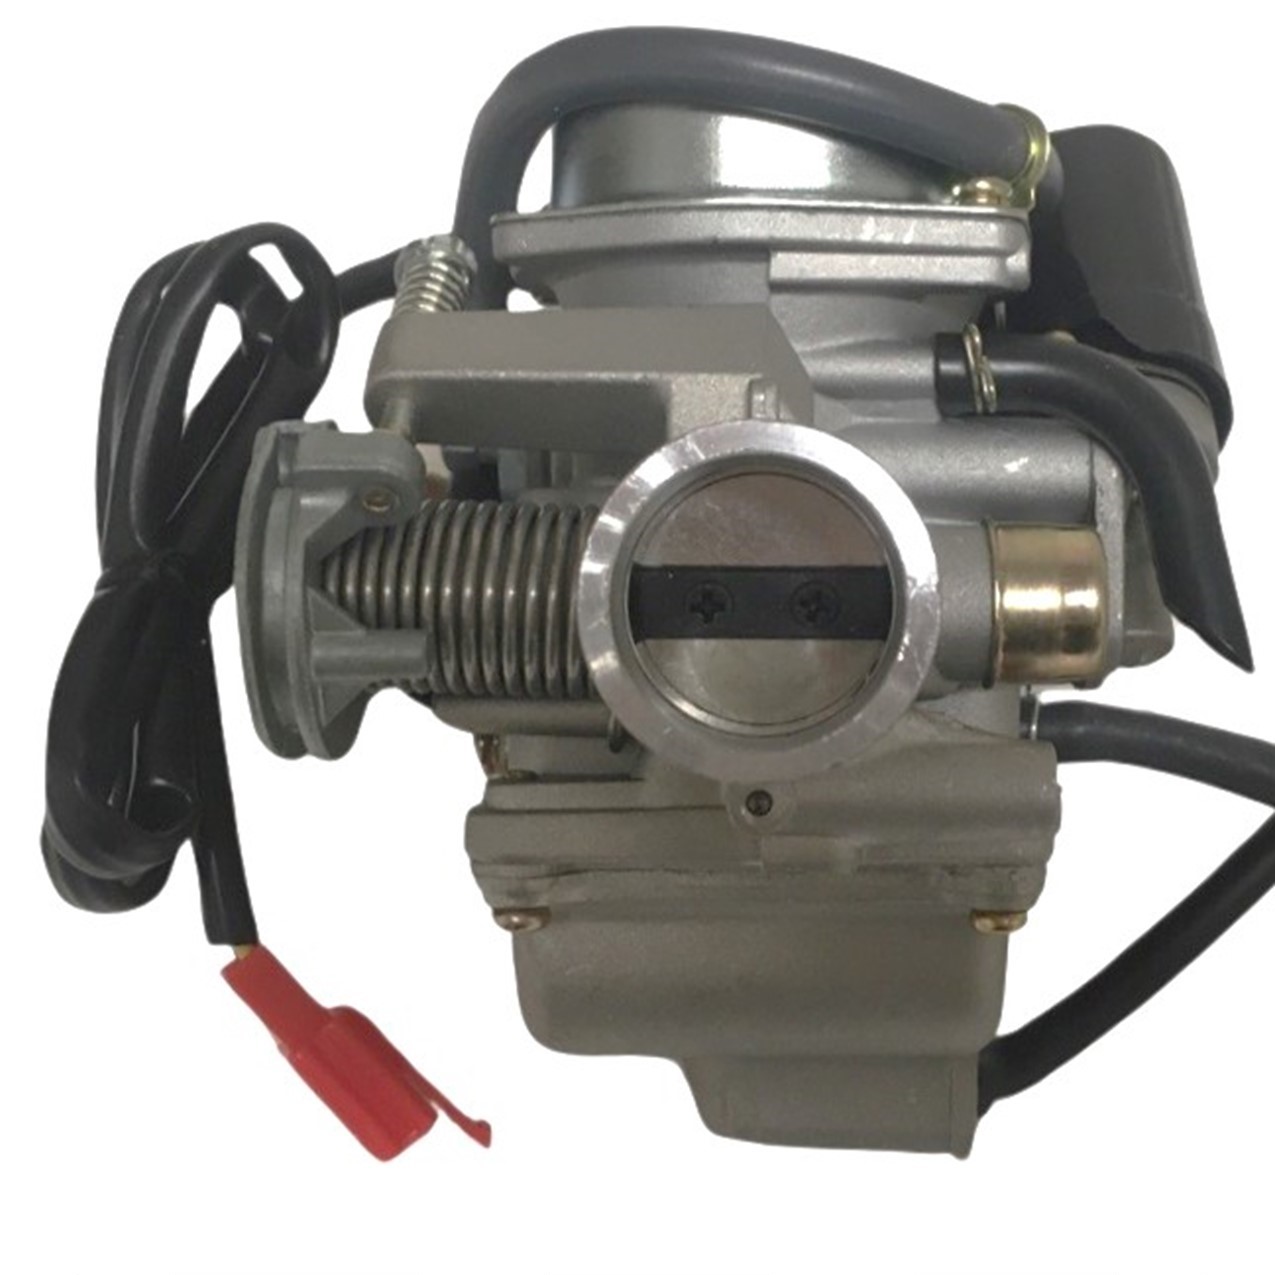 High Performance PD24J Carburetor Intake OD=32mm ID=26mm - 8% larger than standard. Air Box OD=42mm Fits Most GY6 125, 150, 180cc ATV, GoKarts, Motorcycles, Scooters